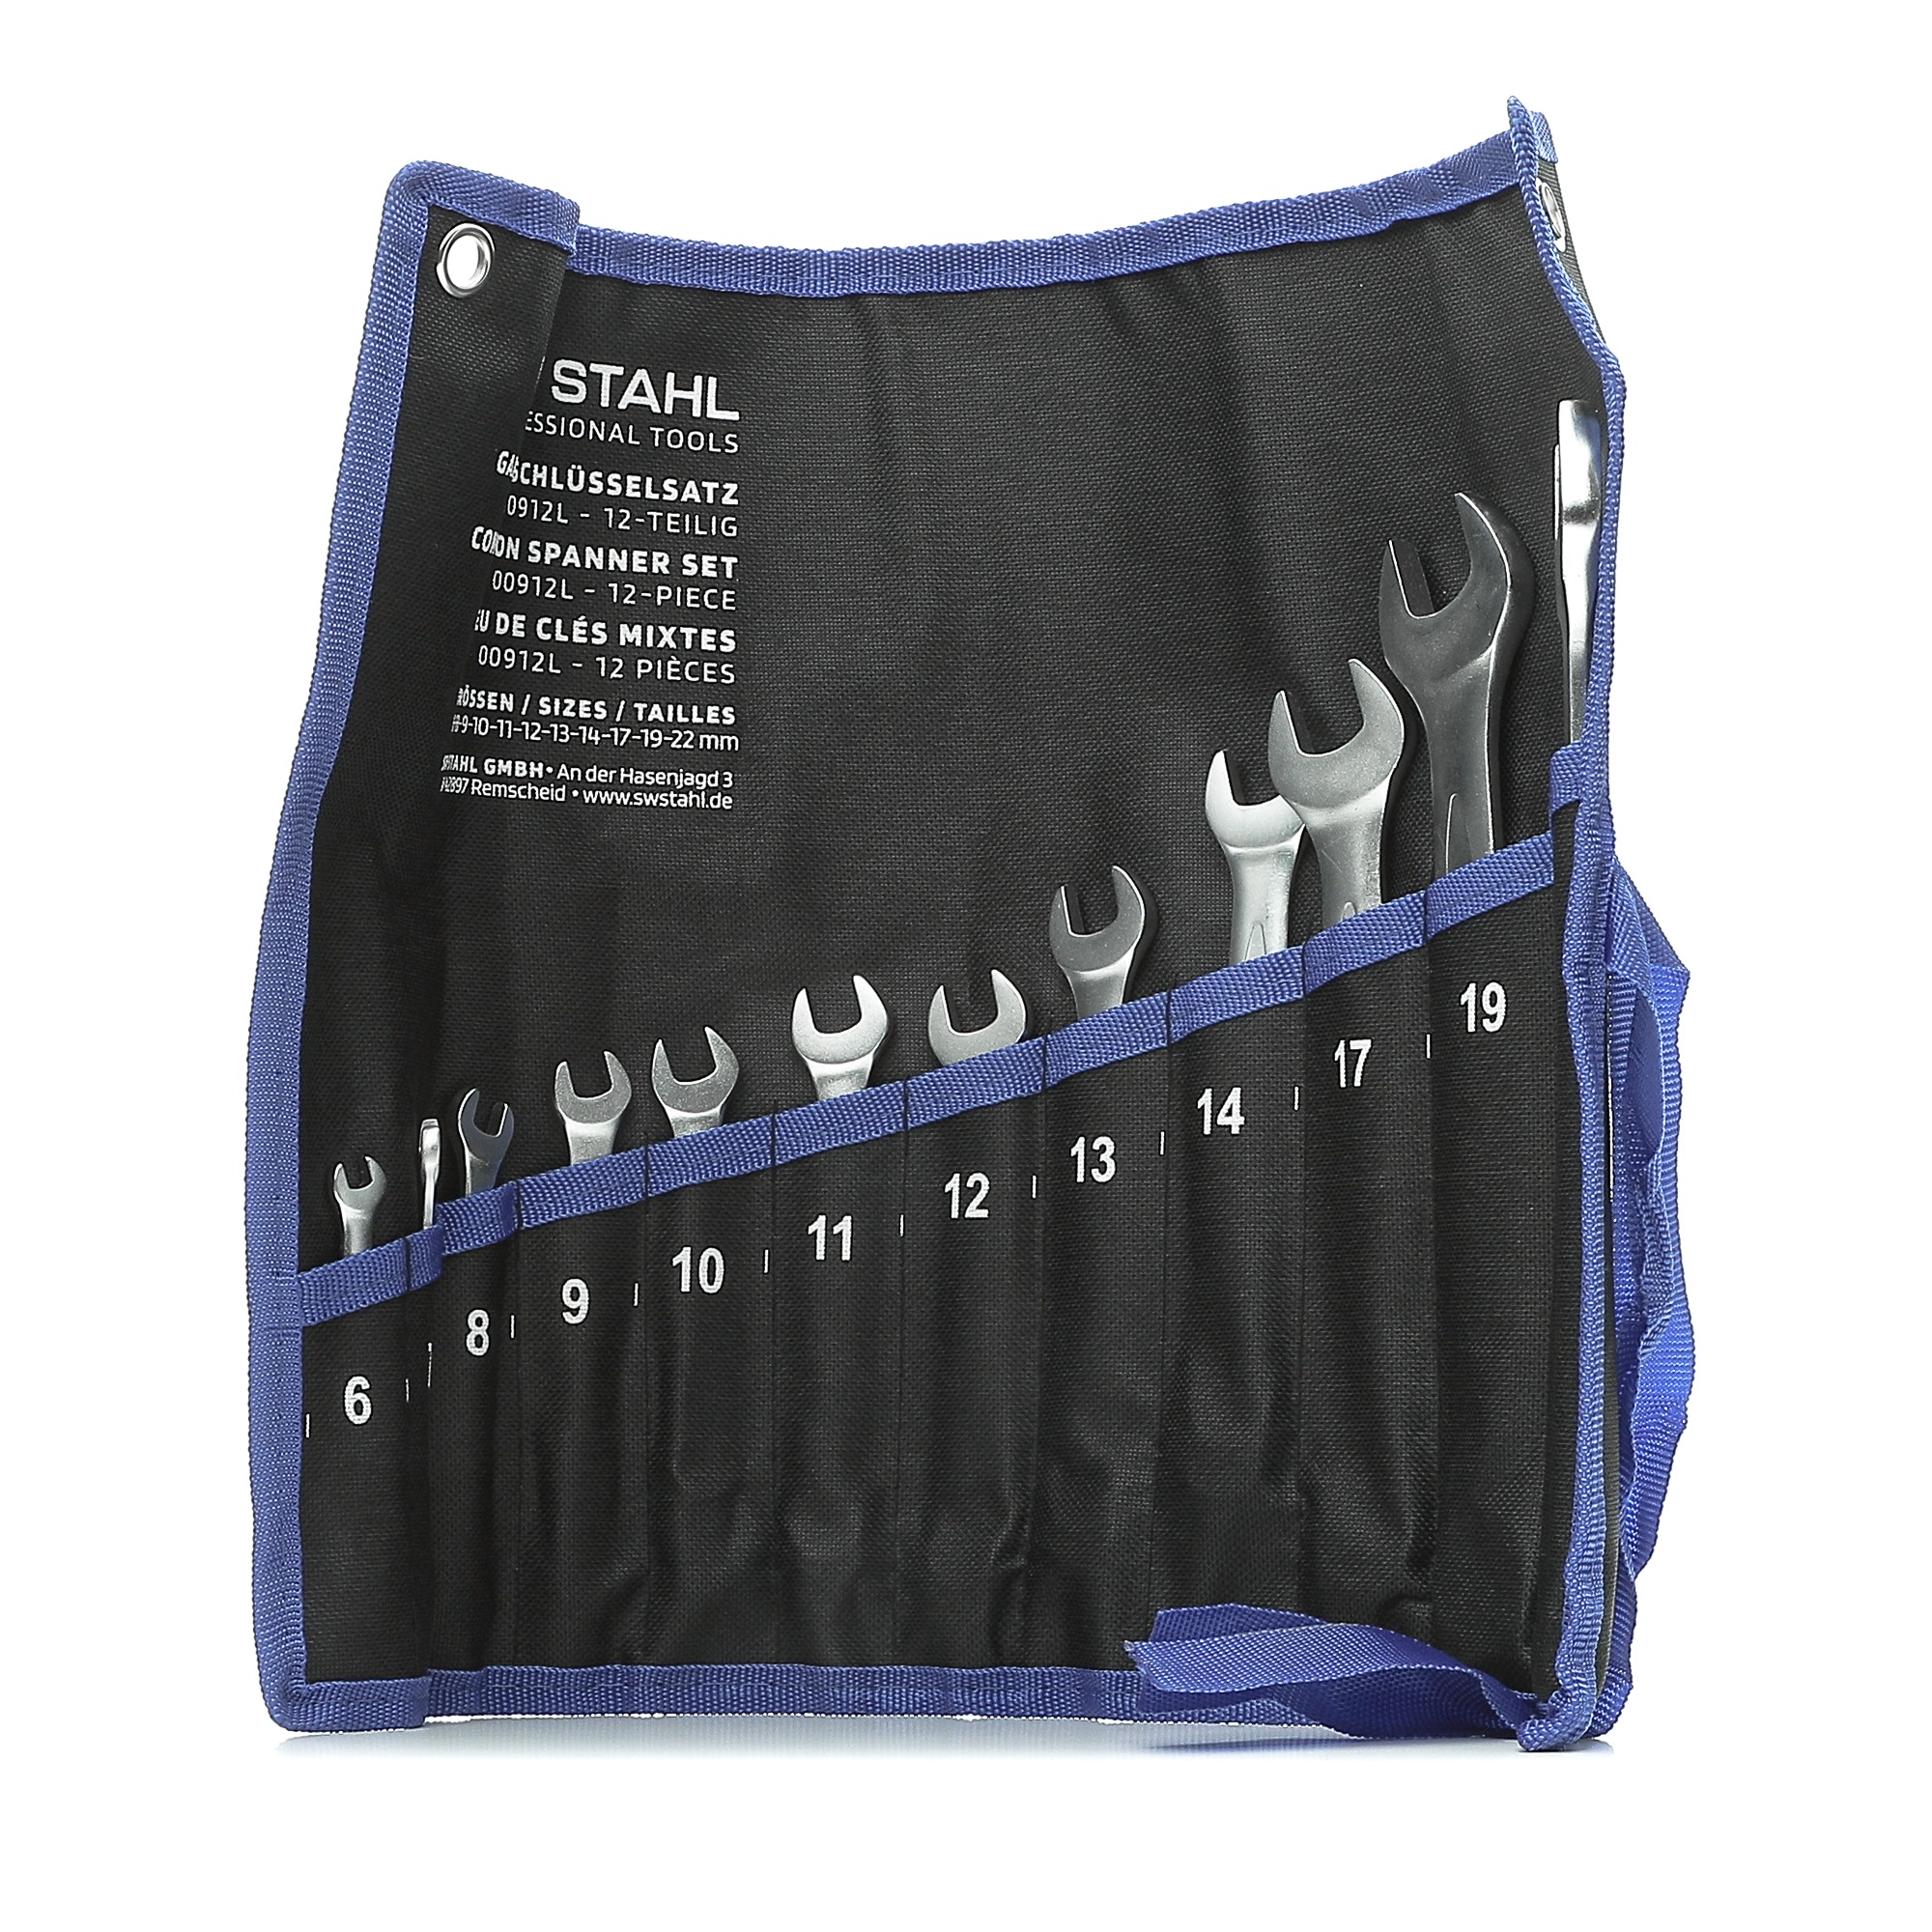 00912L SW-Stahl Spanner Set, ring / open ended Number of tools: 12 ▷  AUTODOC price and review